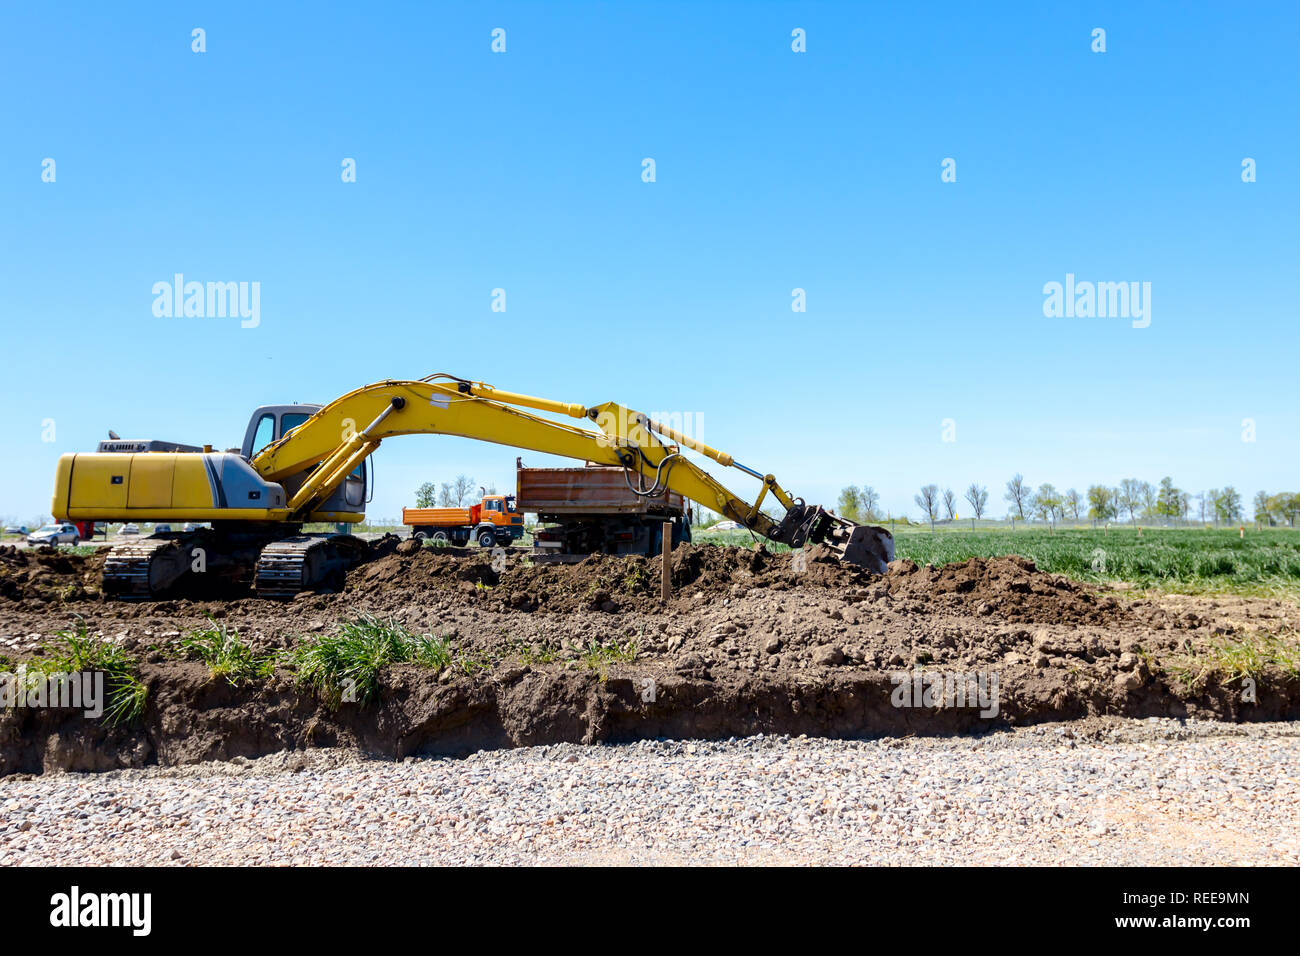 Big Tipper Stock Photos & Big Tipper Stock Images - Page 2 - Alamy